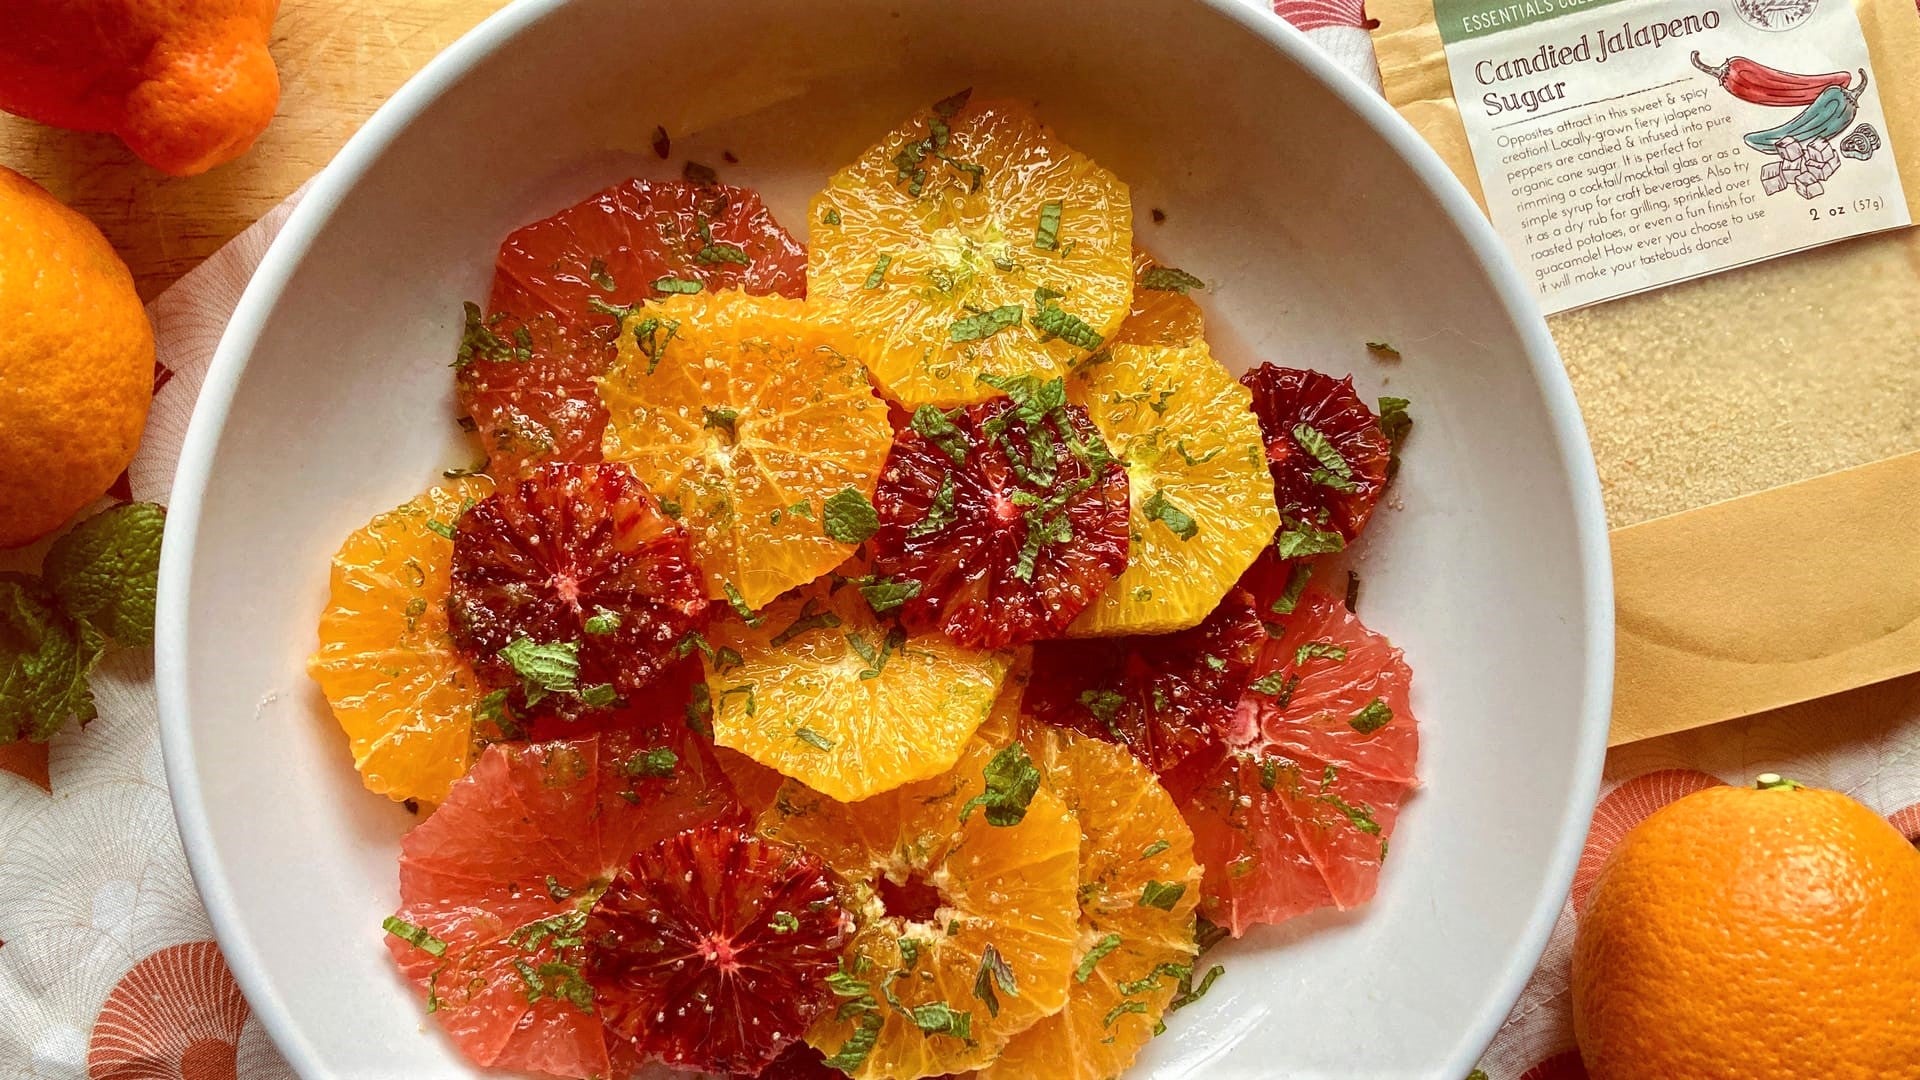 A colorful bowl of citrus slices with a green flecked garnish with citrus fruits in the background and a bag of Well Seasoned Table Candied Jalapeno Sugar